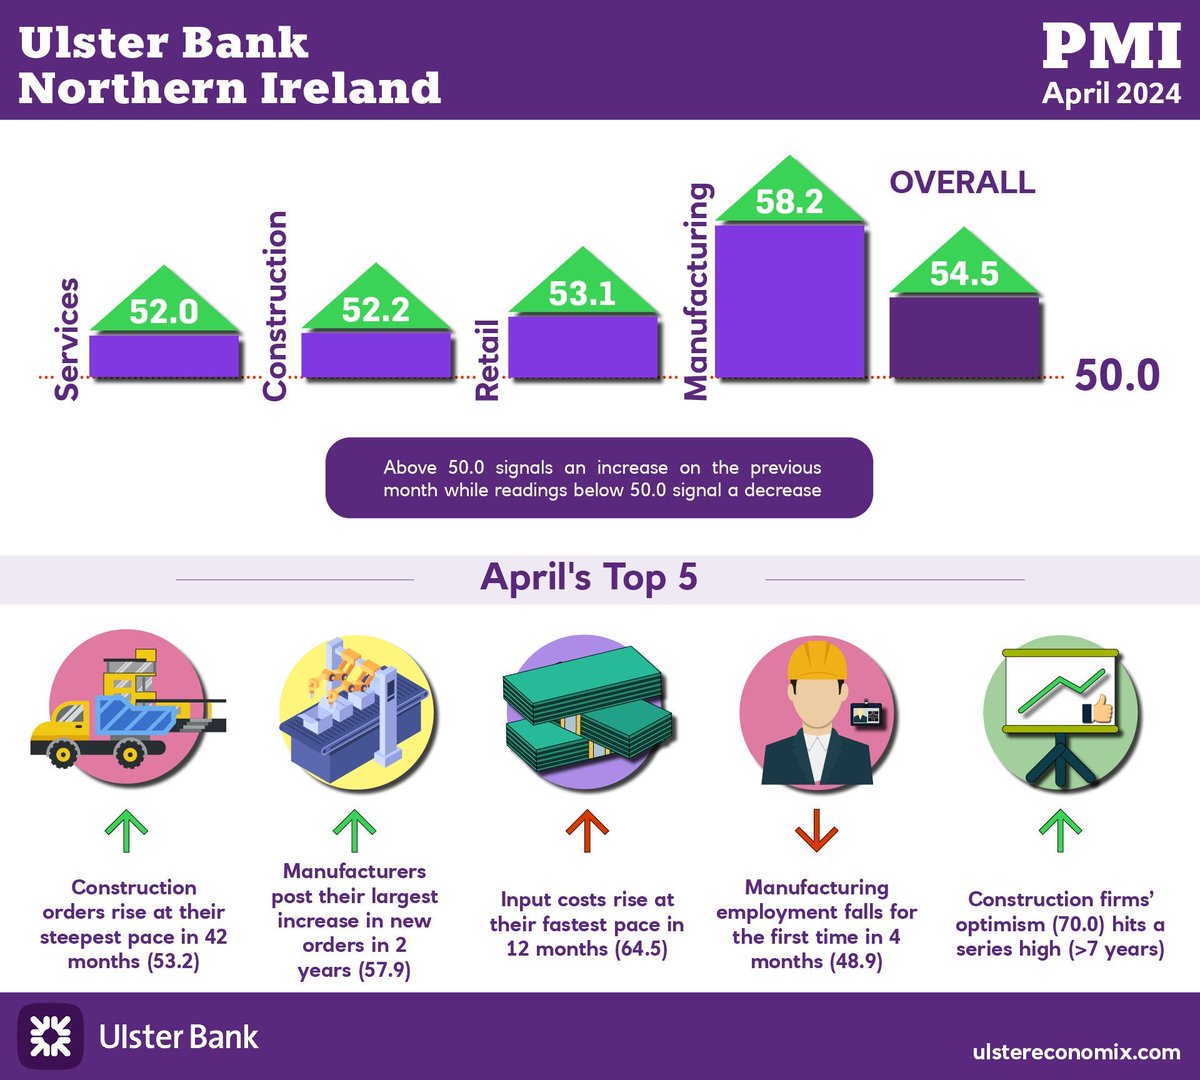 PMI: Business activity continues to rise amid further marked expansion of new orders

Today sees the release of April data from the Ulster Bank PMI. The latest report indicated that a further sharp rise in new orders fed through to continued growth...

➡️ buff.ly/3QFlKkX